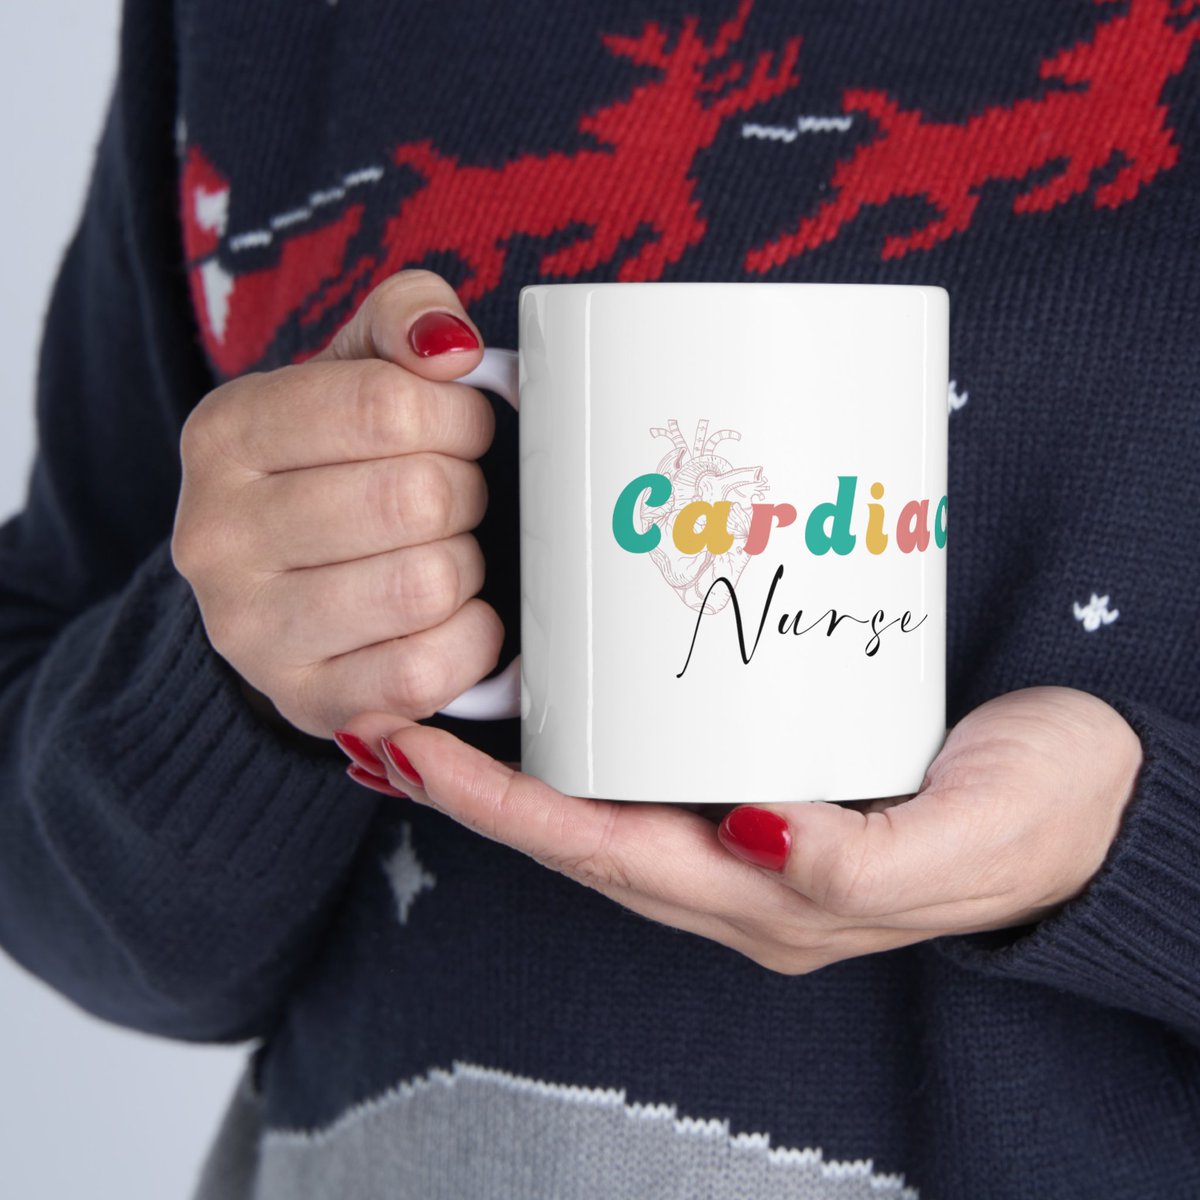 Looking for the perfect coffee mug for a cardiac nurse Look no further than our collection of personalized and customized mugs
#cardiacnursemug #cardiacnurse #nursegraduation #nursetravelmug #cvicunurse #cardiacnurseshirt #cardiacsonography #customnursemug #giftsfornurses #nurse